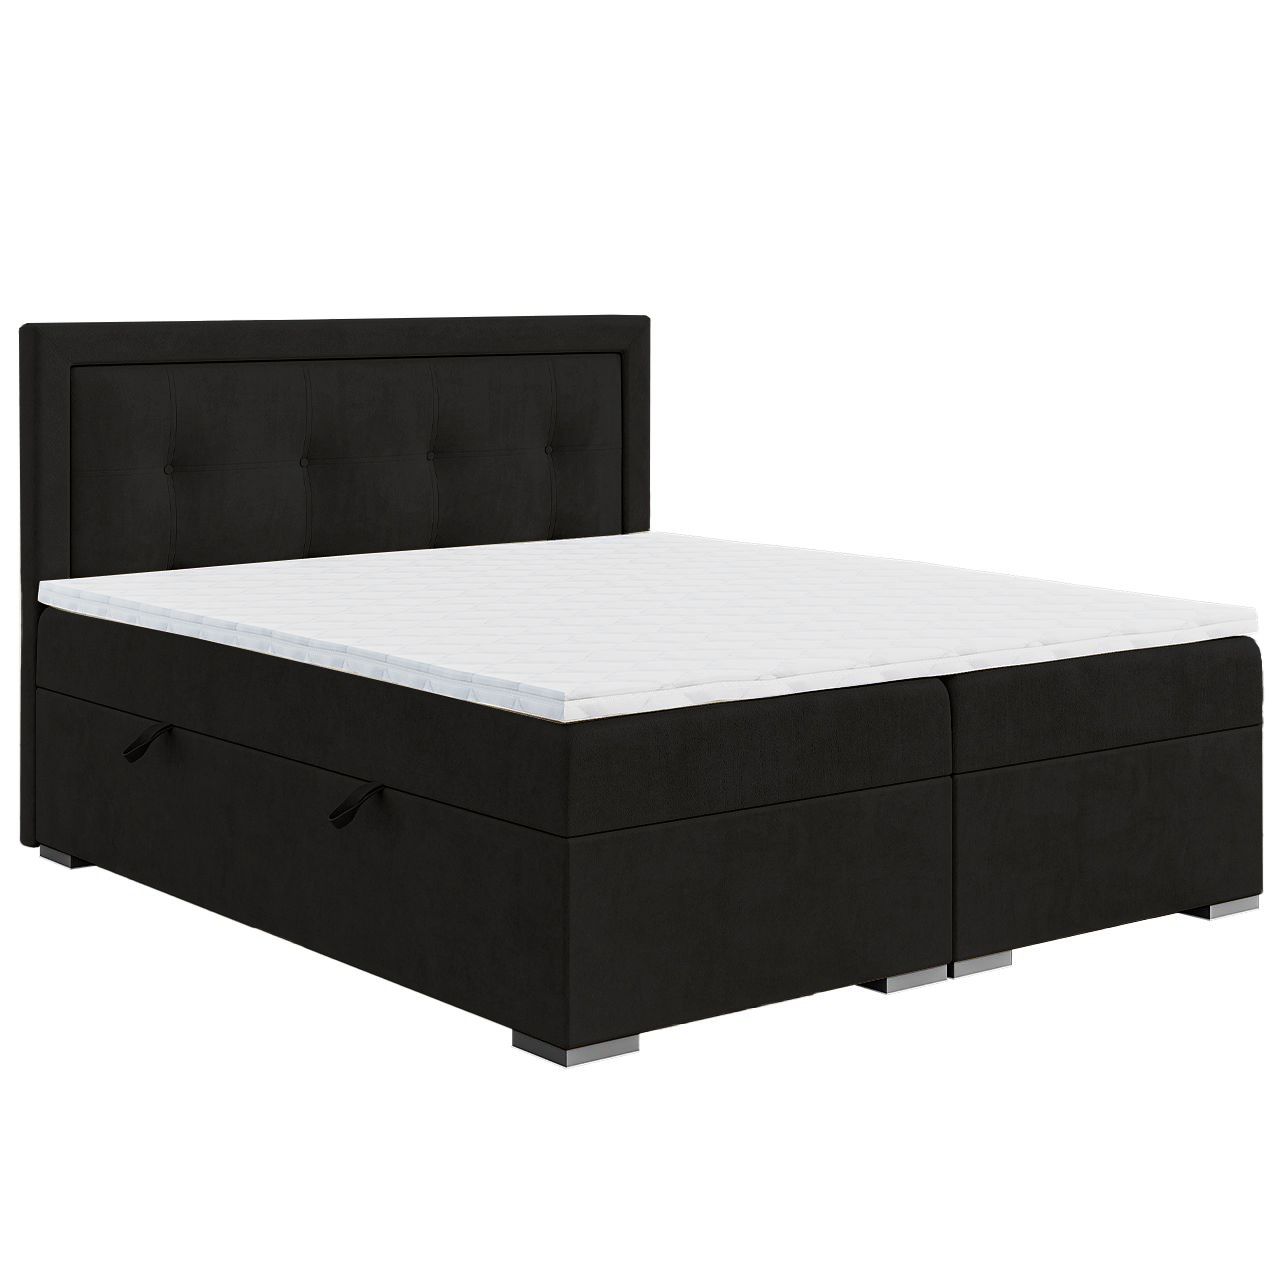 Upholstered bed VERI 120x200 riviera 100